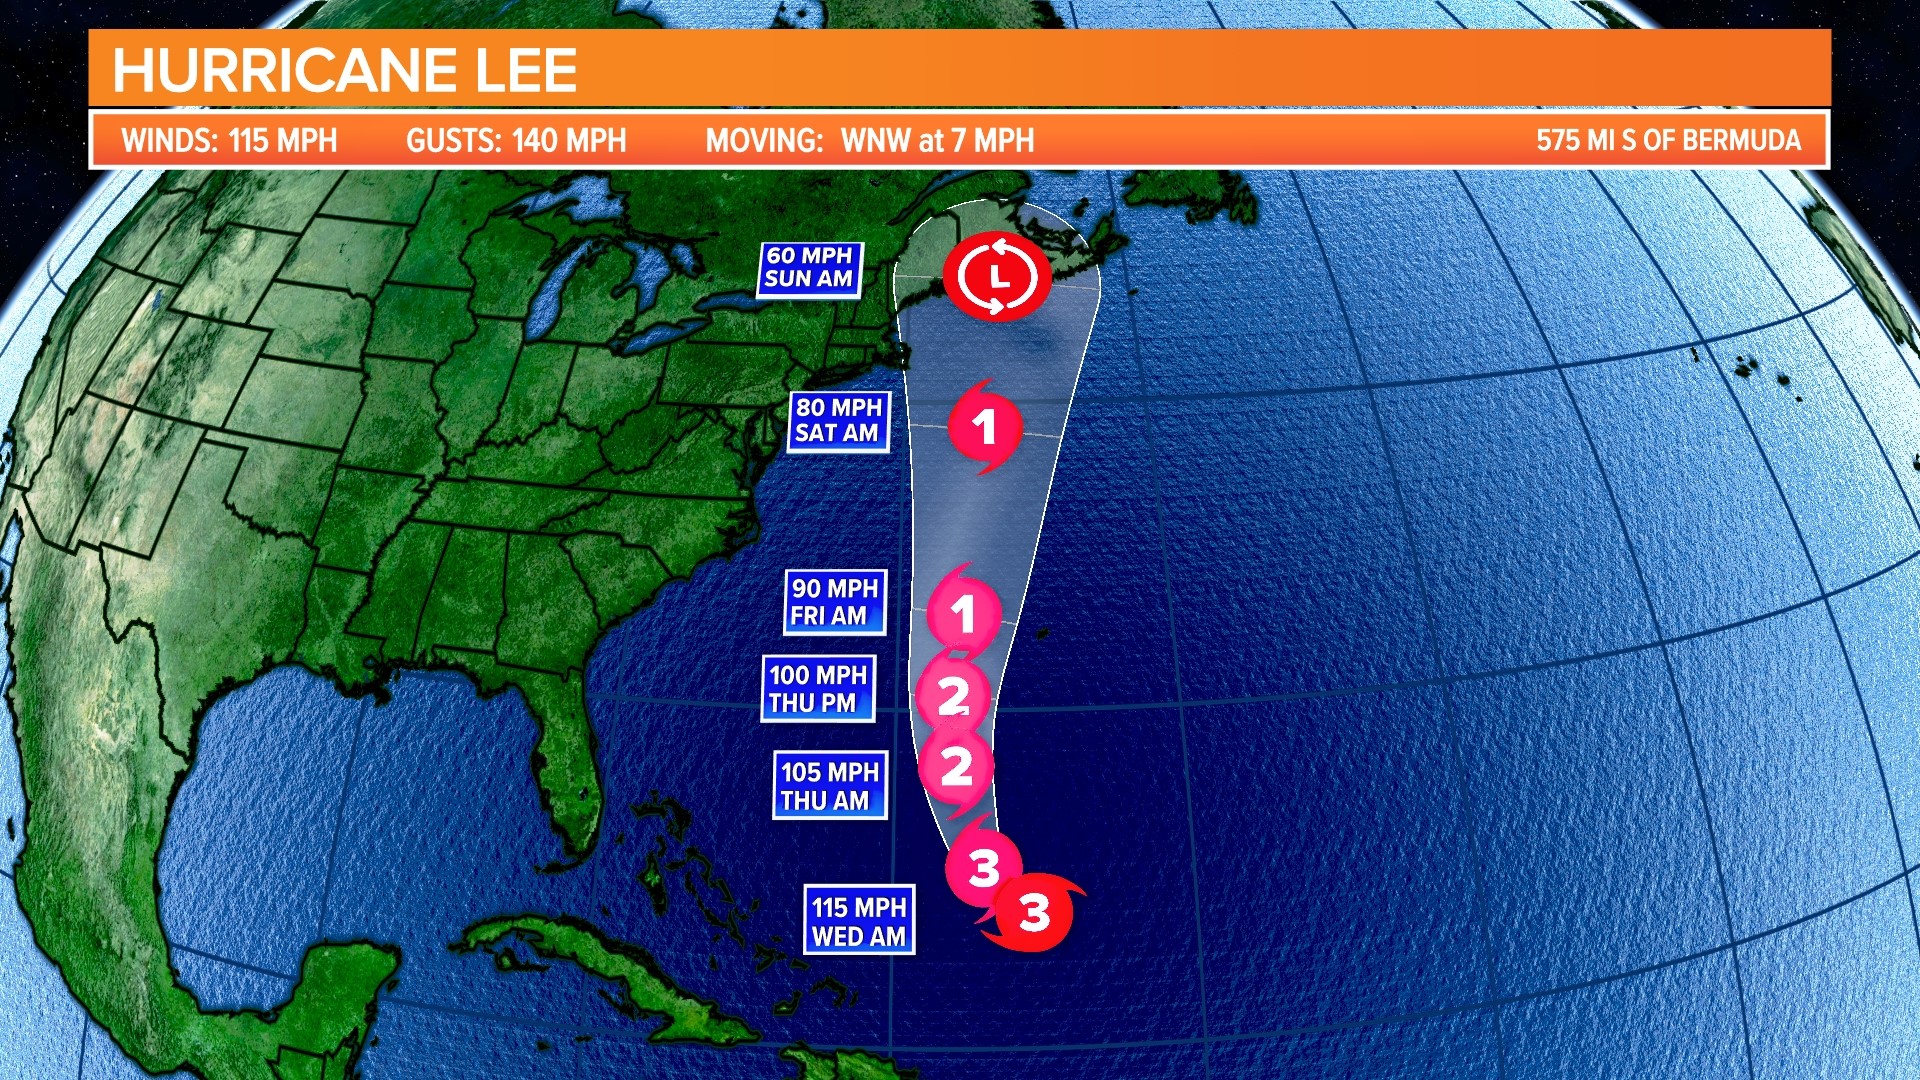 Hurricane Lee continues to be a dangerous Category 3 storm in the Atlantic.